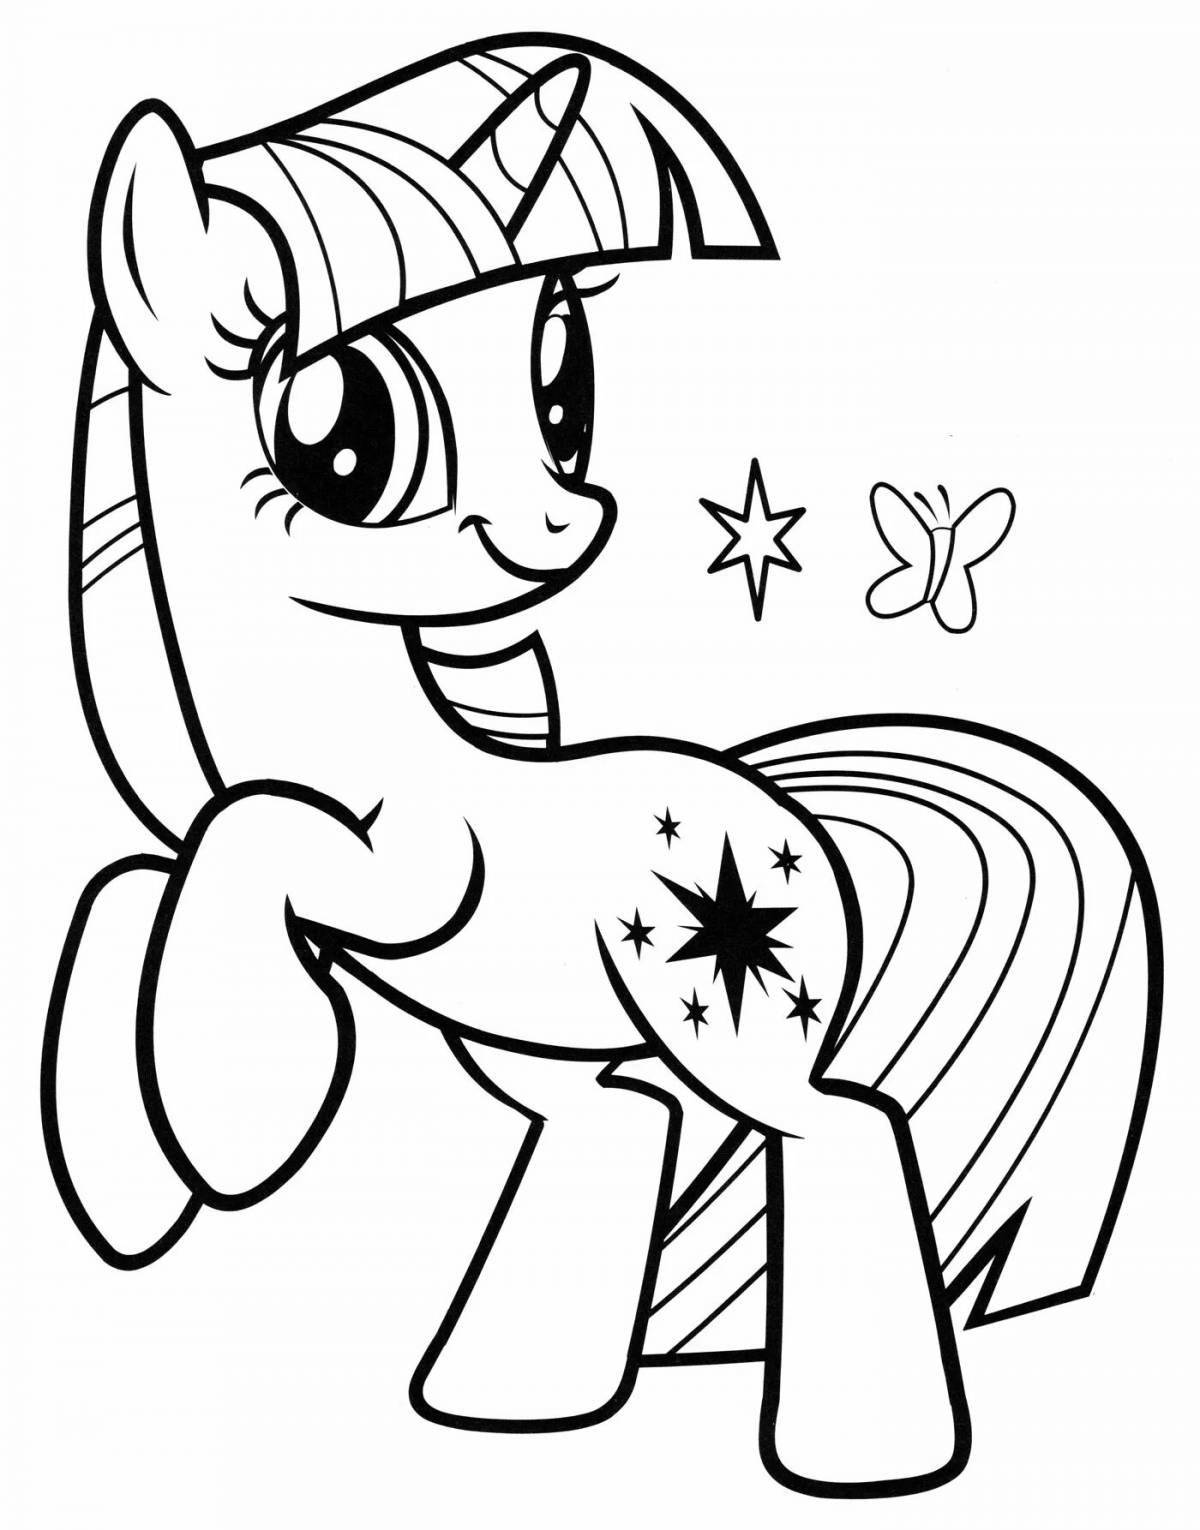 Twilight sparkle coloring page